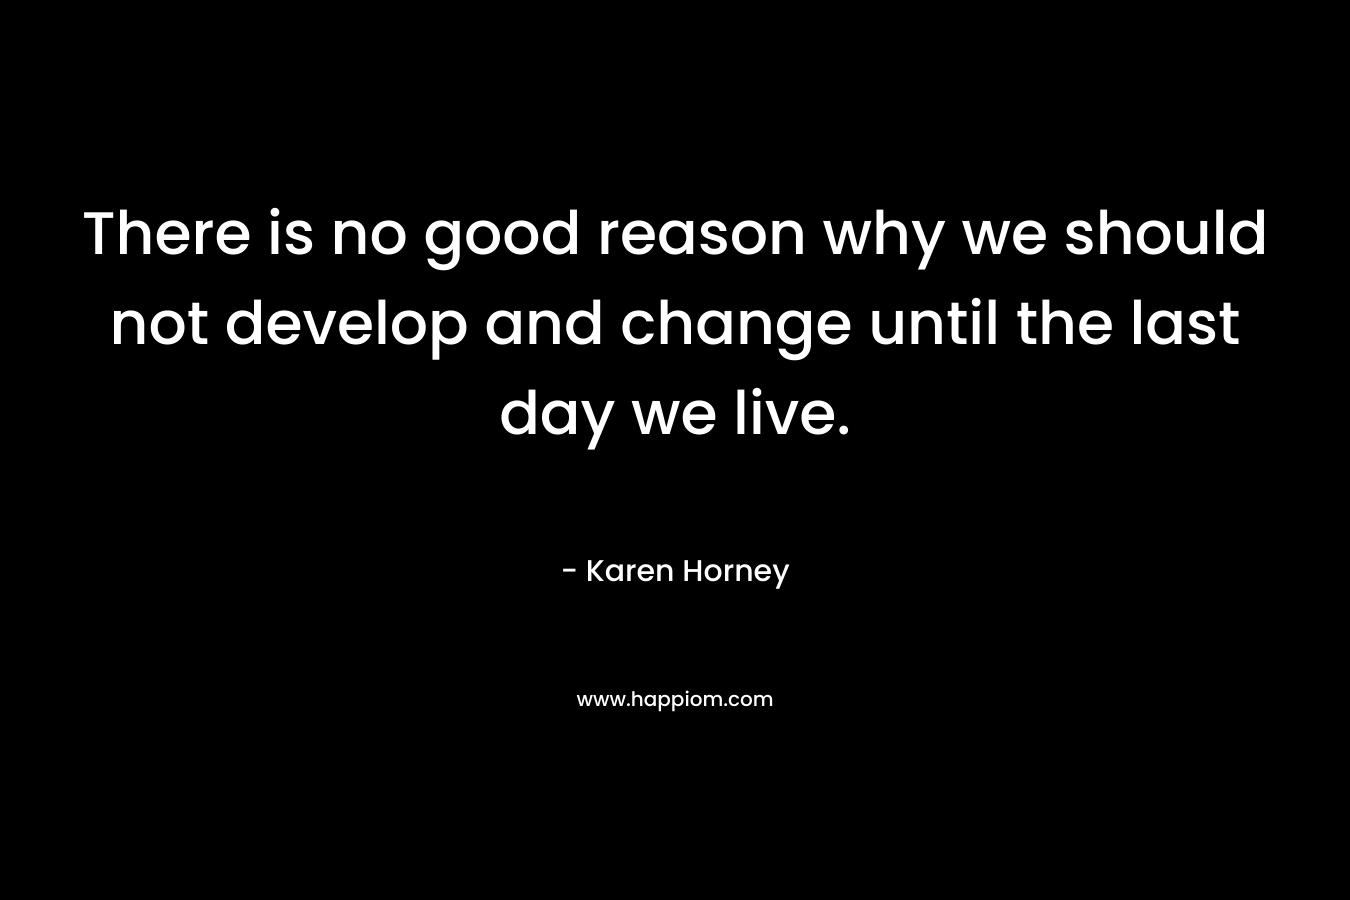 There is no good reason why we should not develop and change until the last day we live. – Karen Horney